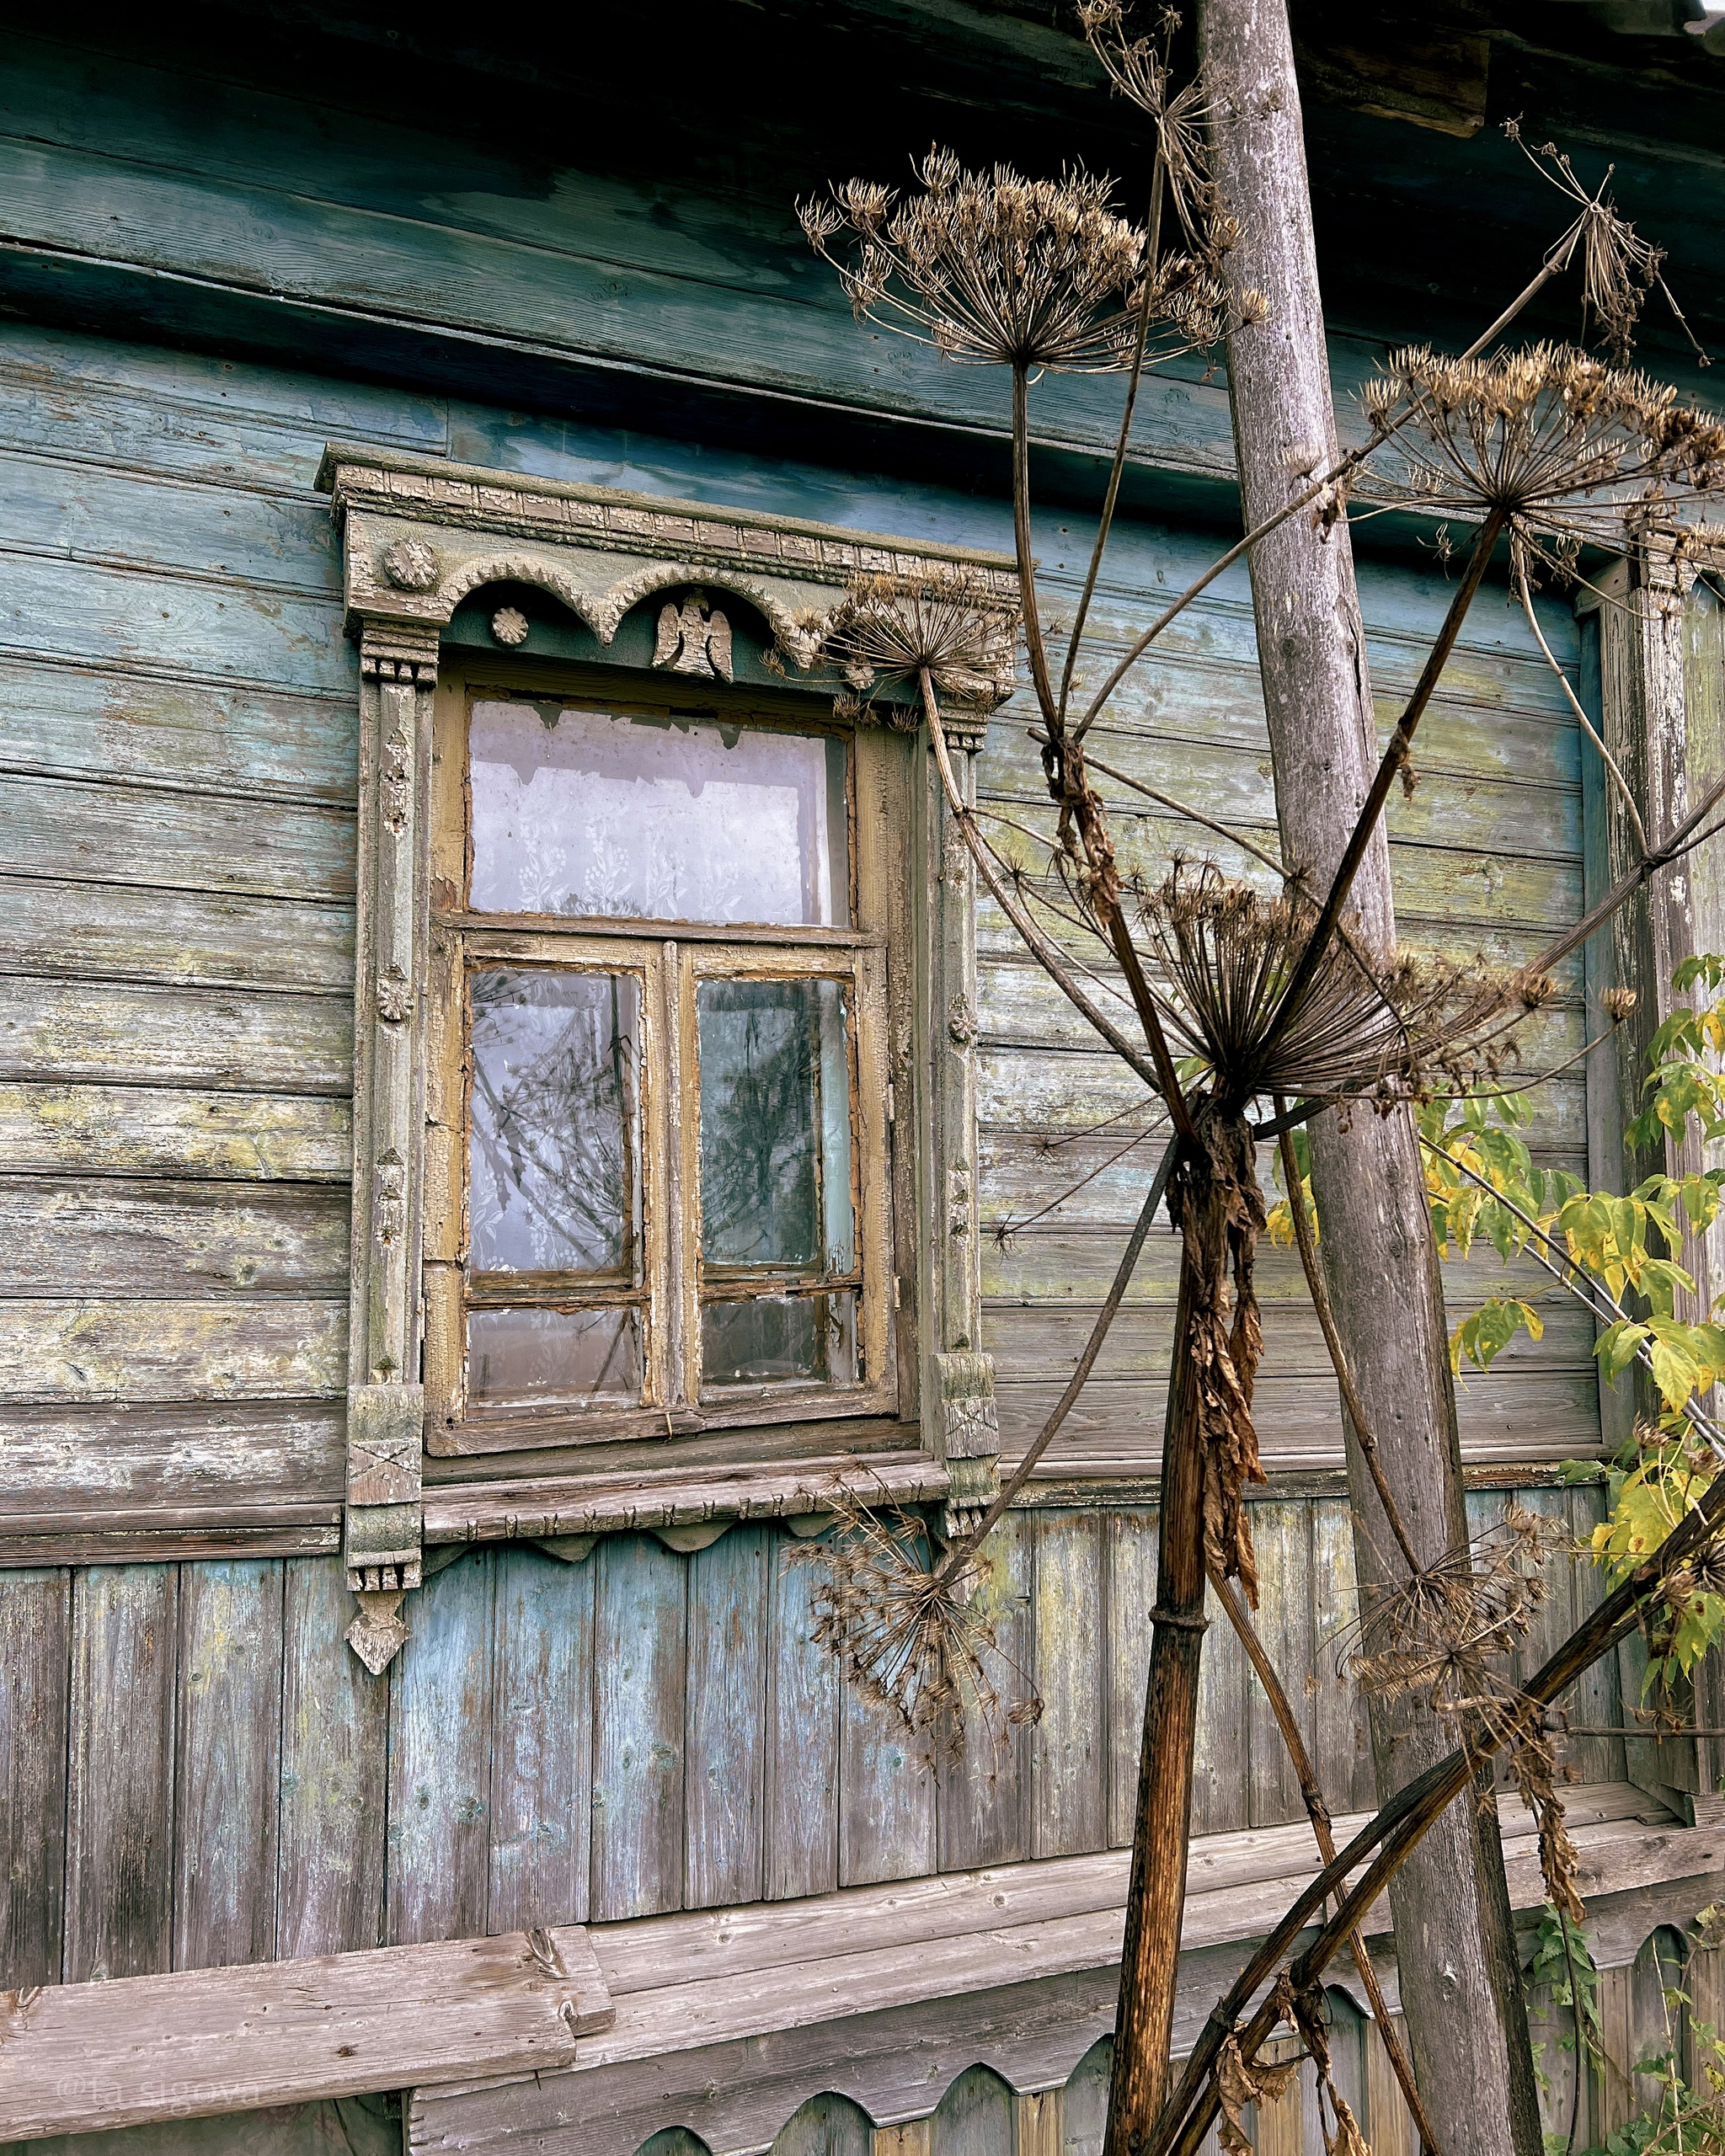 Rural ashes straight from the Tver region - Outskirts, Tver region, Village, House, Longpost, The photo, Izba, Tree house, Wooden house, Russia, Tourism, Travels, Travel across Russia, My